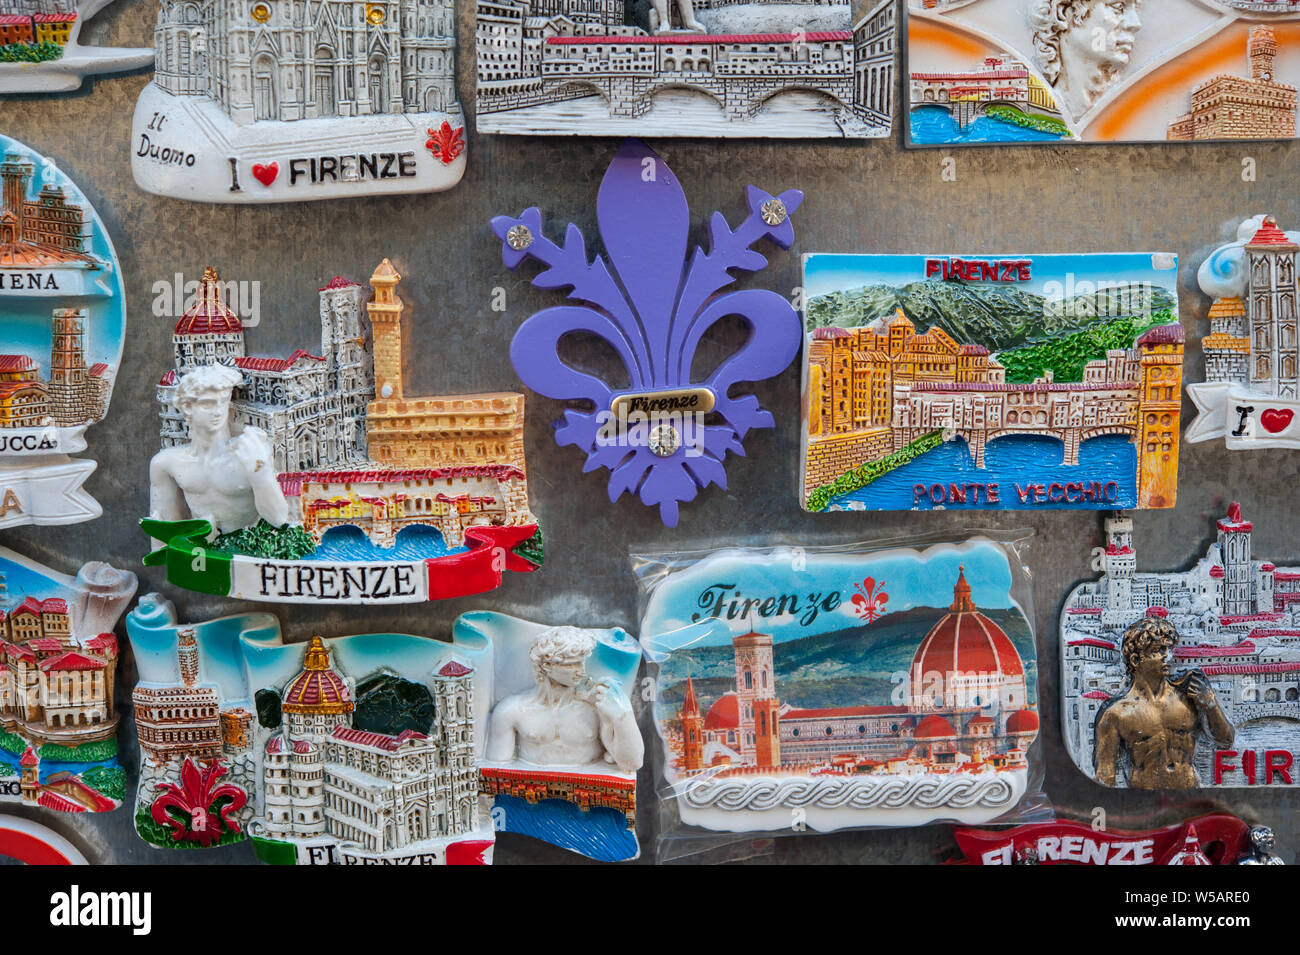 Tourist magnet souvenirs on sale at the market stall in Florence, Italy Stock Photo